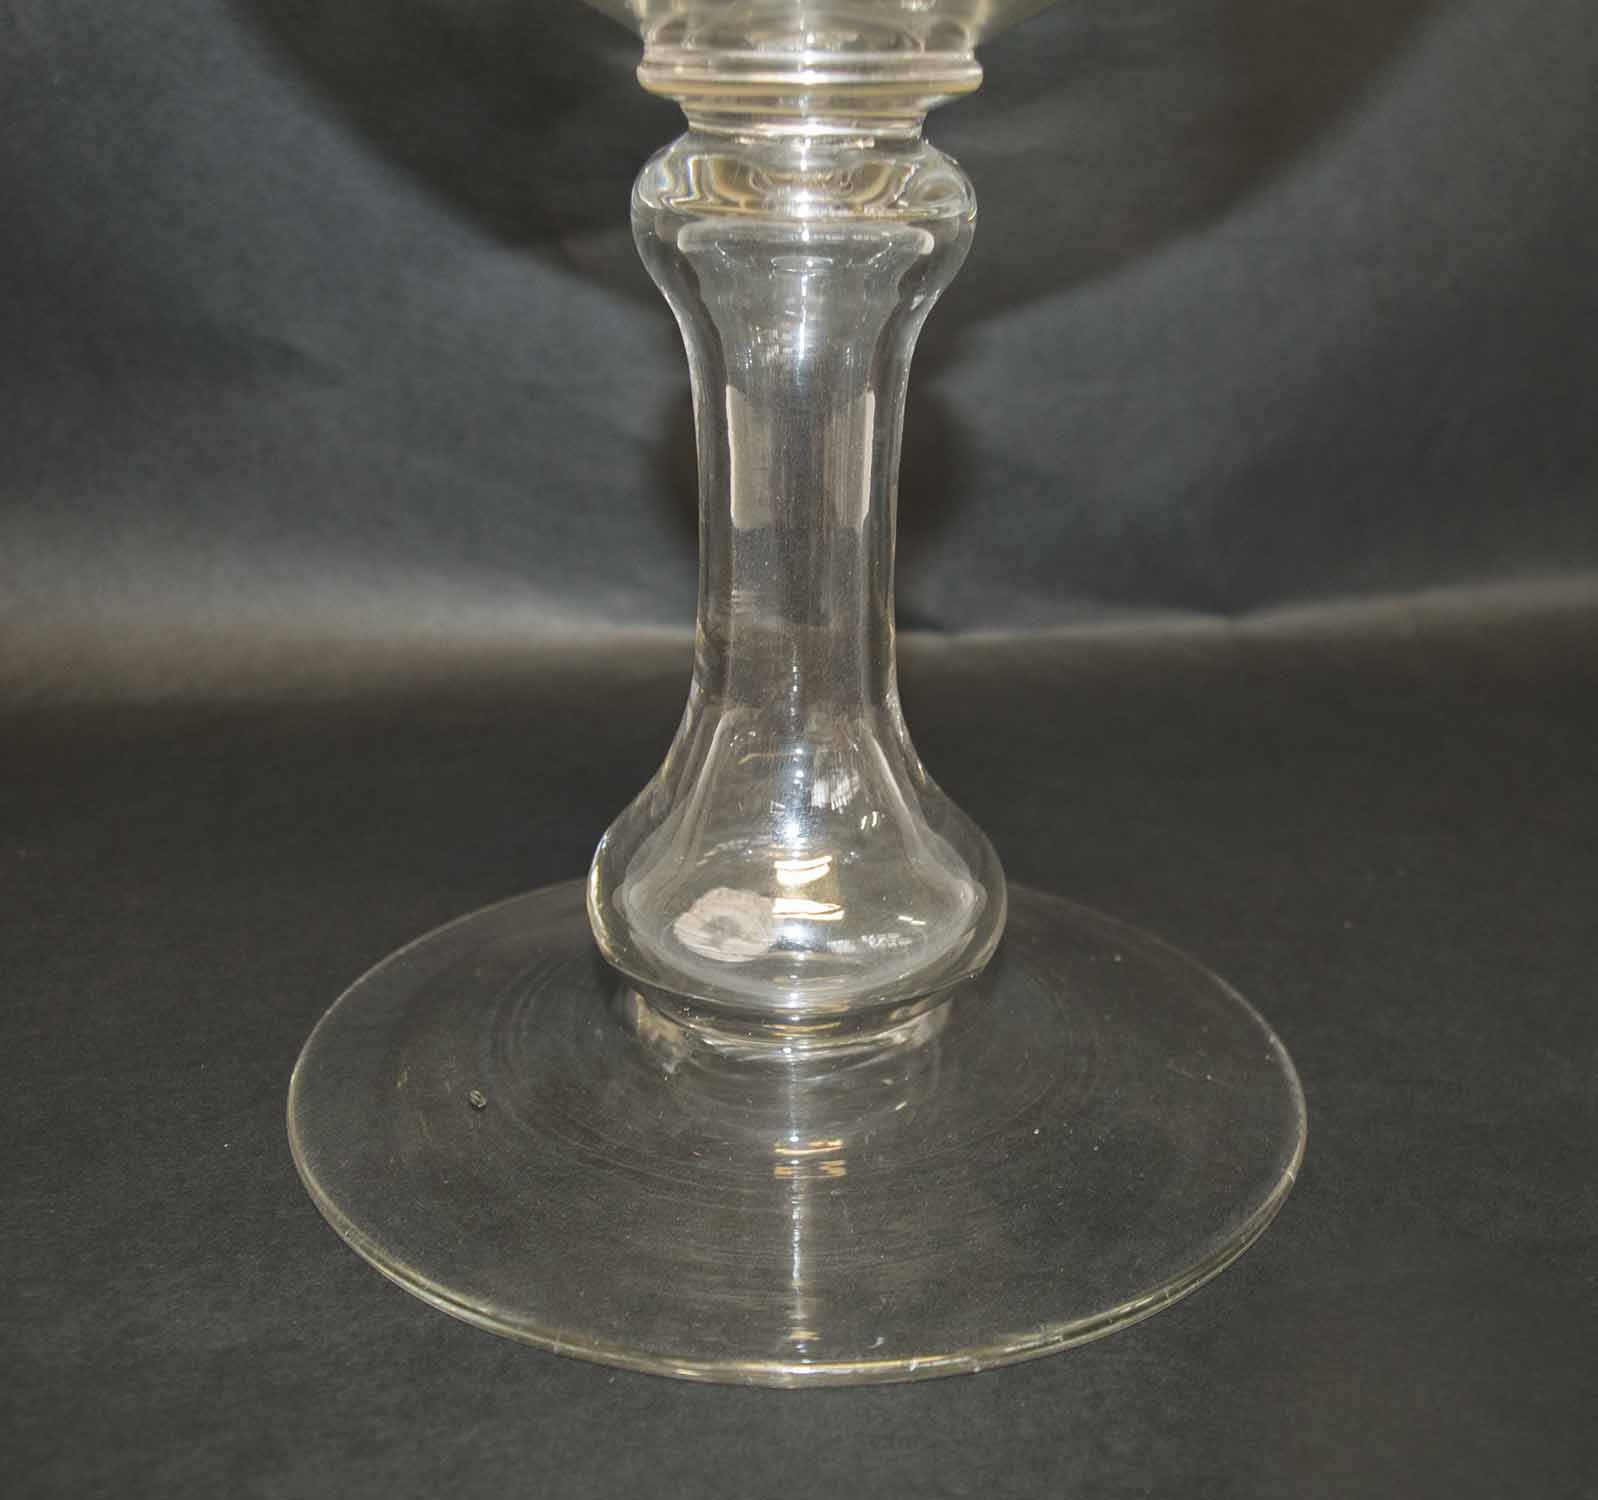 VICTORIAN ETCHED GLASS, large rare item with Victorian silver coin inside stem, 34cm H. - Image 2 of 2